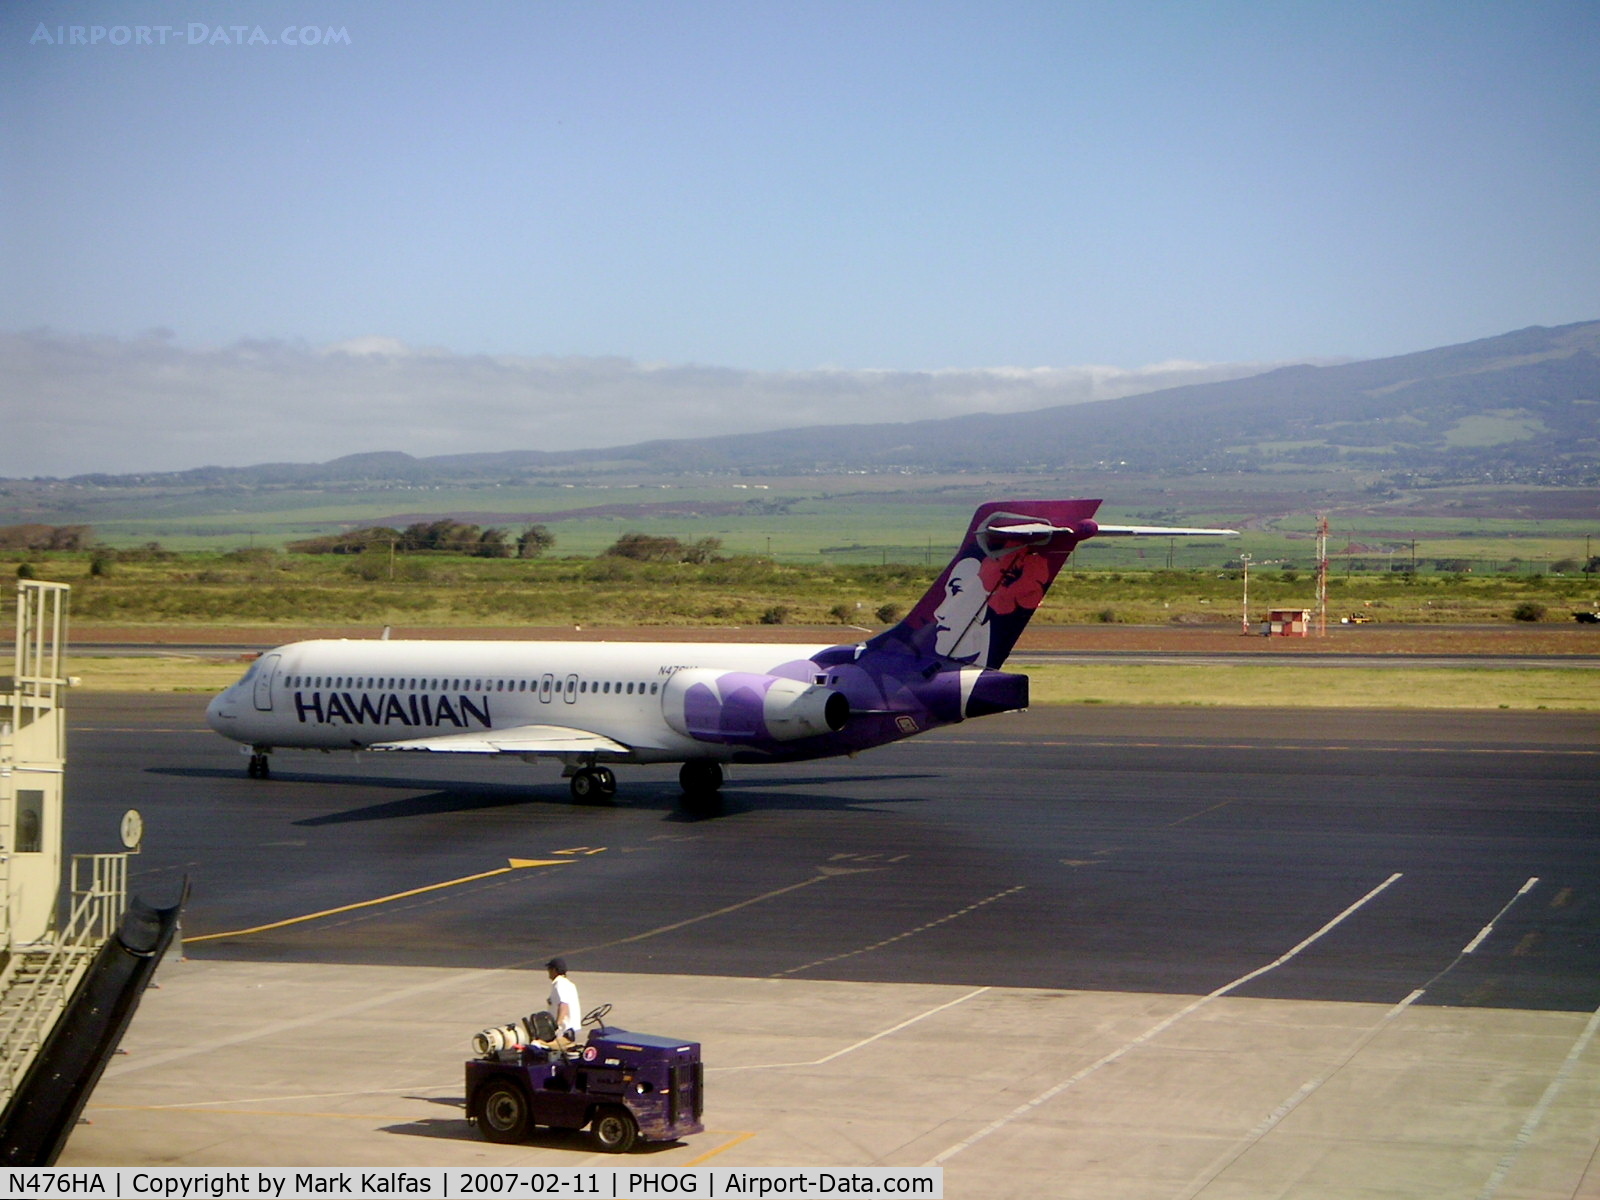 N476HA, 2001 Boeing 717-200 C/N 55118, Push back for a quick trip to PHNL...